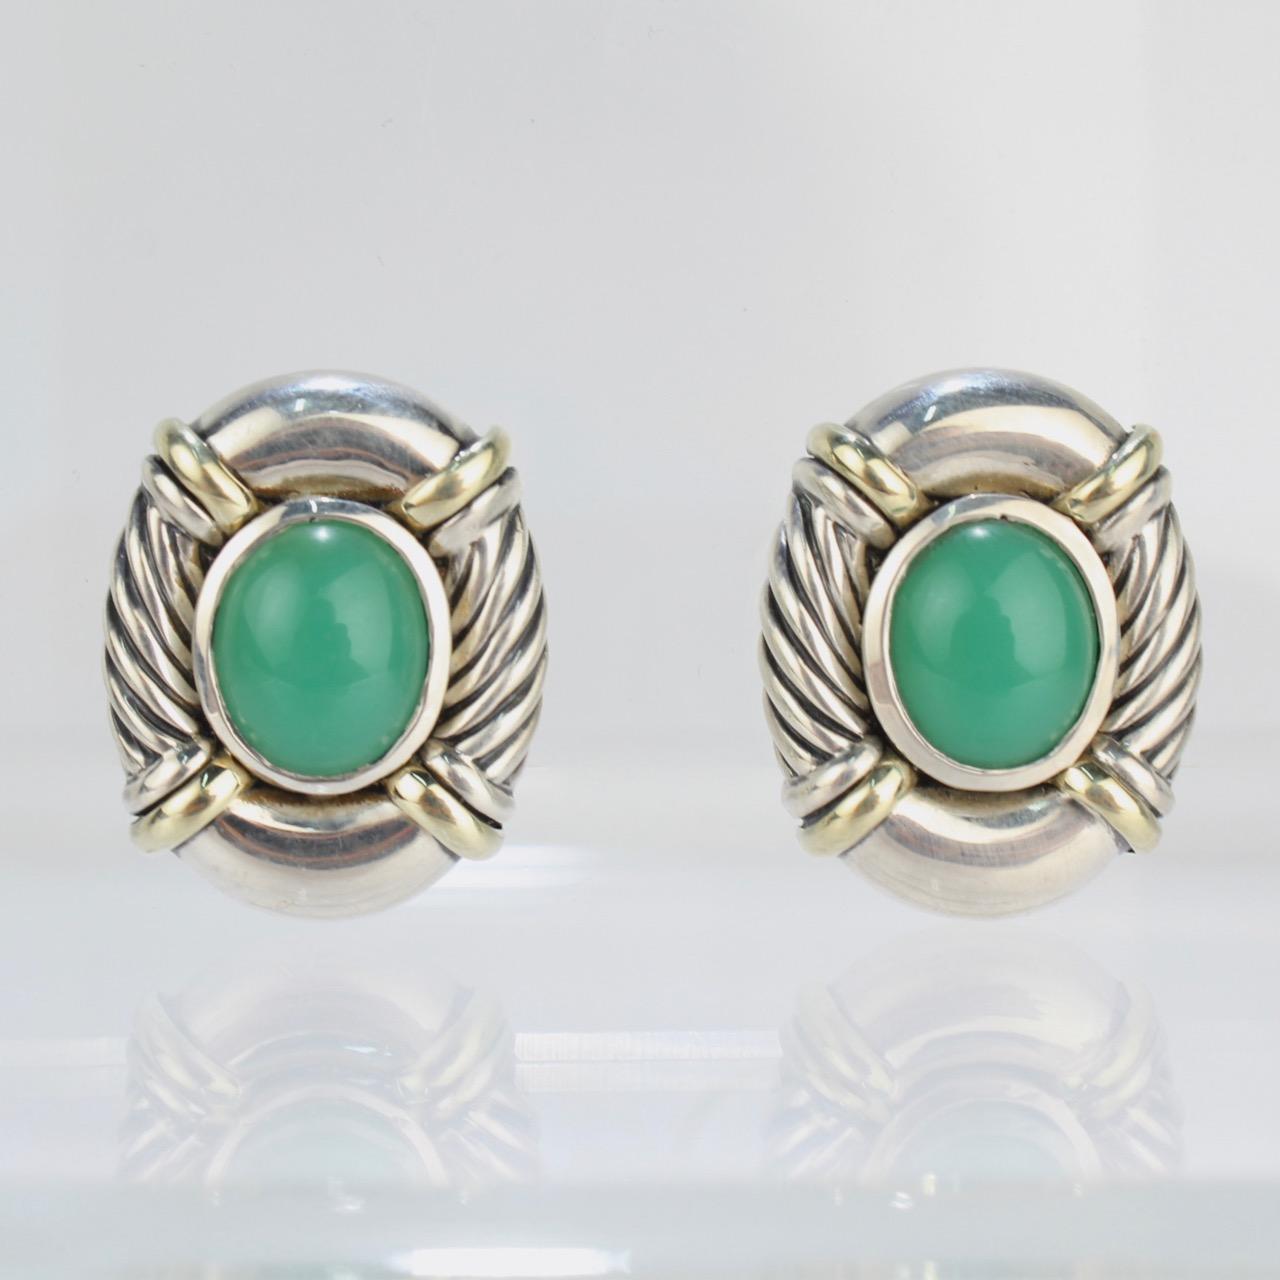 A fine pair of David Yurman clip-on earrings.

Each set with a central chrysoprase cabochon in an oval sterling mount, the edges highlighted with cable decoration and 18K gold accent bands.

Originally, the earrings were made as omega clips, and